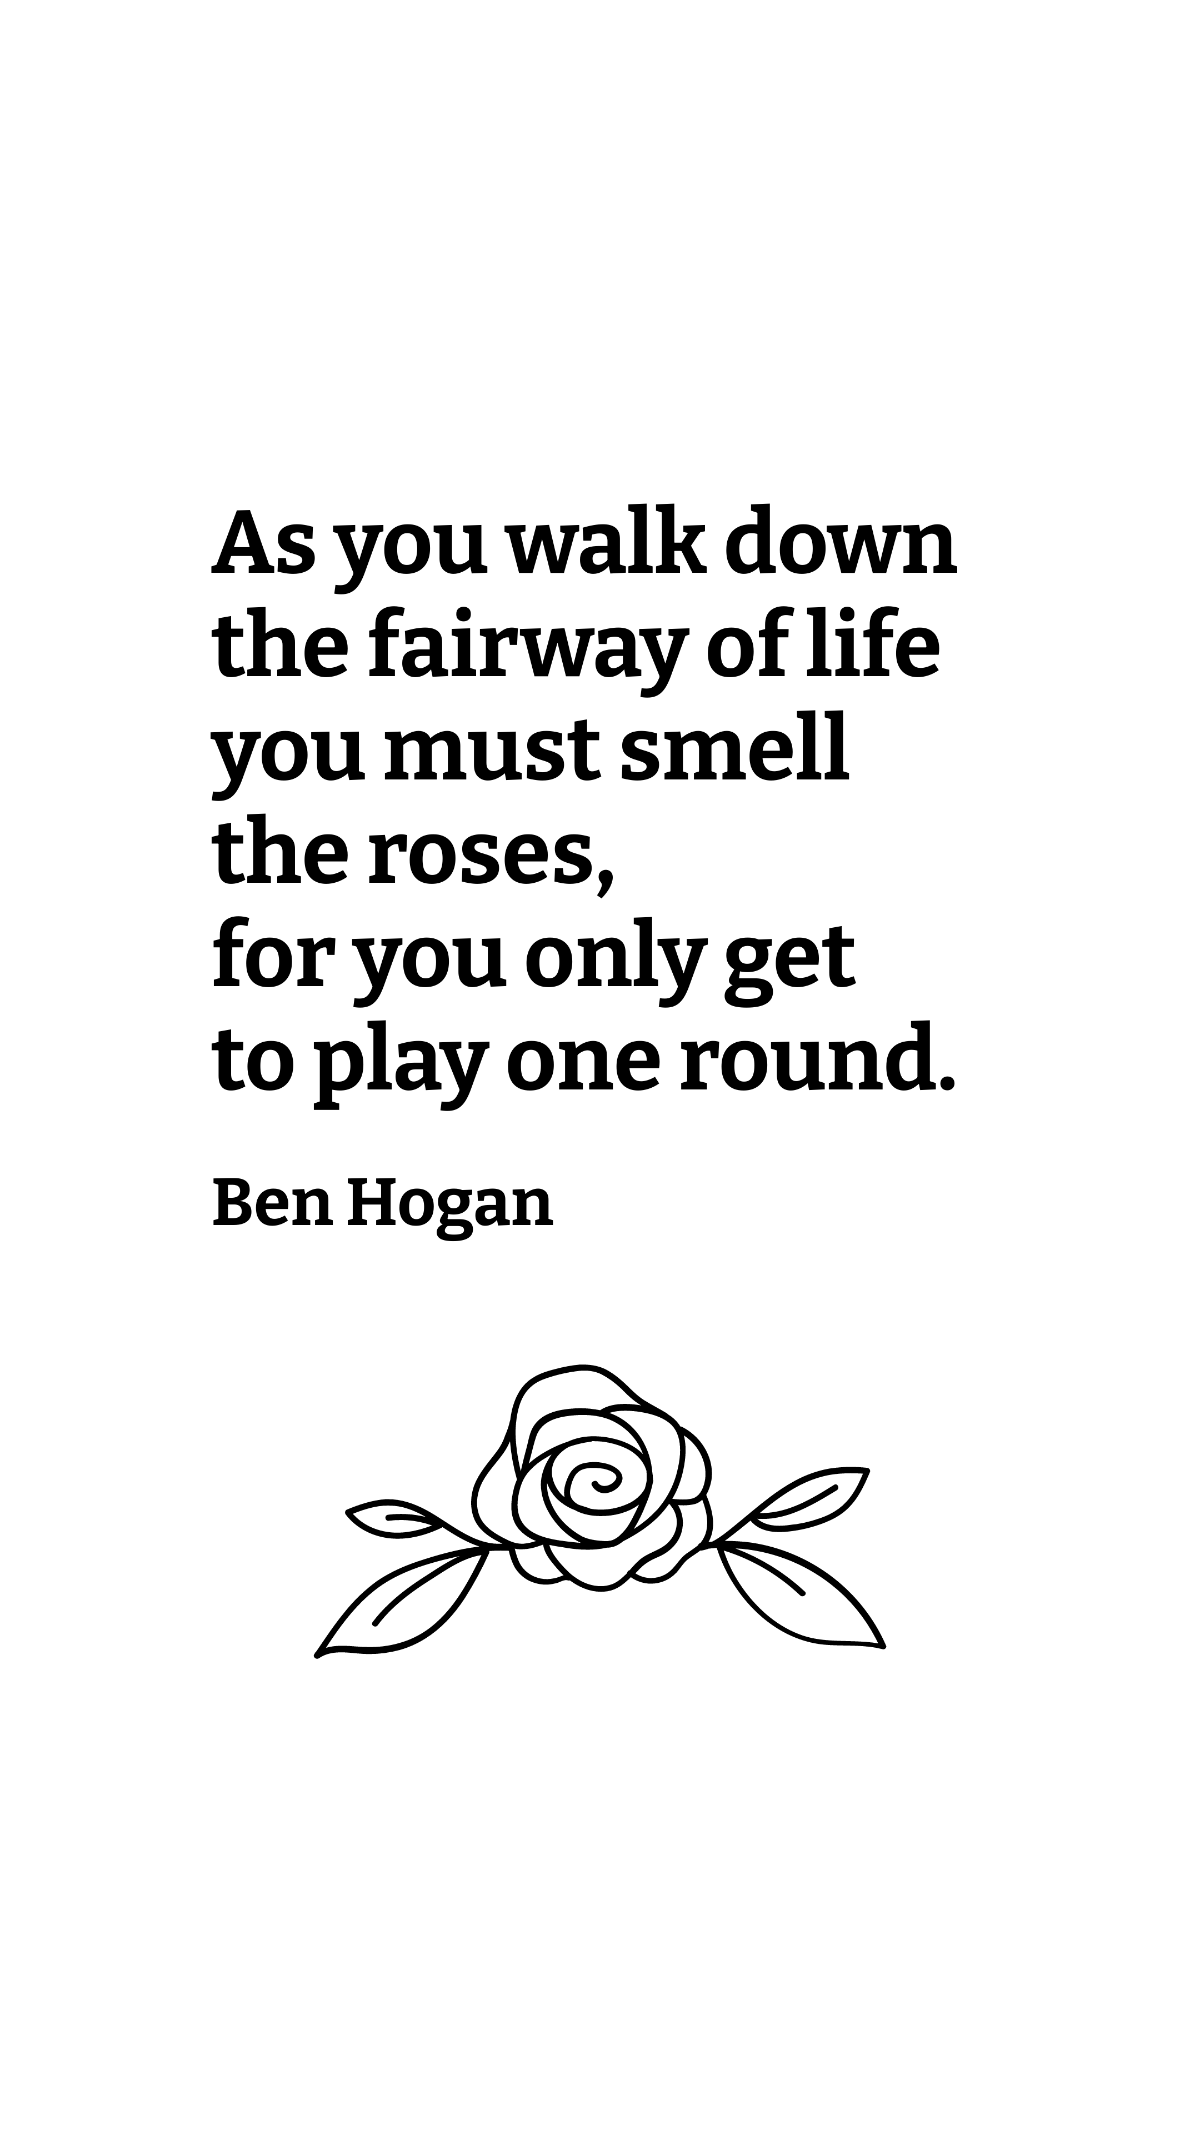 Ben Hogan - As you walk down the fairway of life you must smell the roses, for you only get to play one round. Template